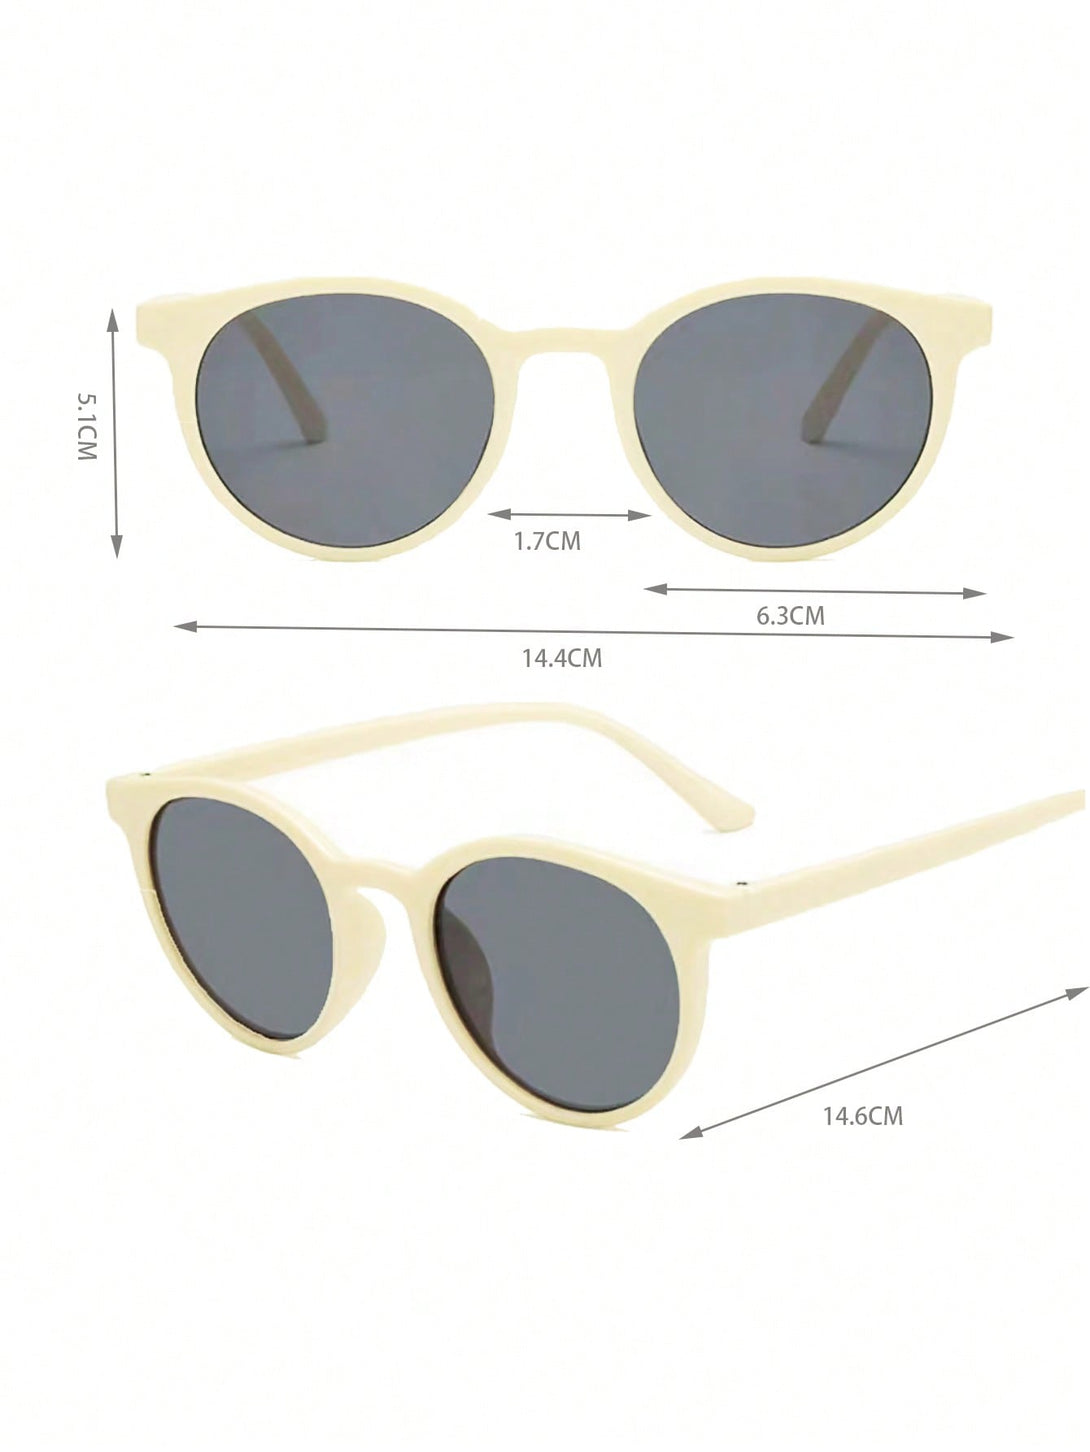 1pair Women Round Lens Casual Sunglasses, For Daily Life - Negative Apparel